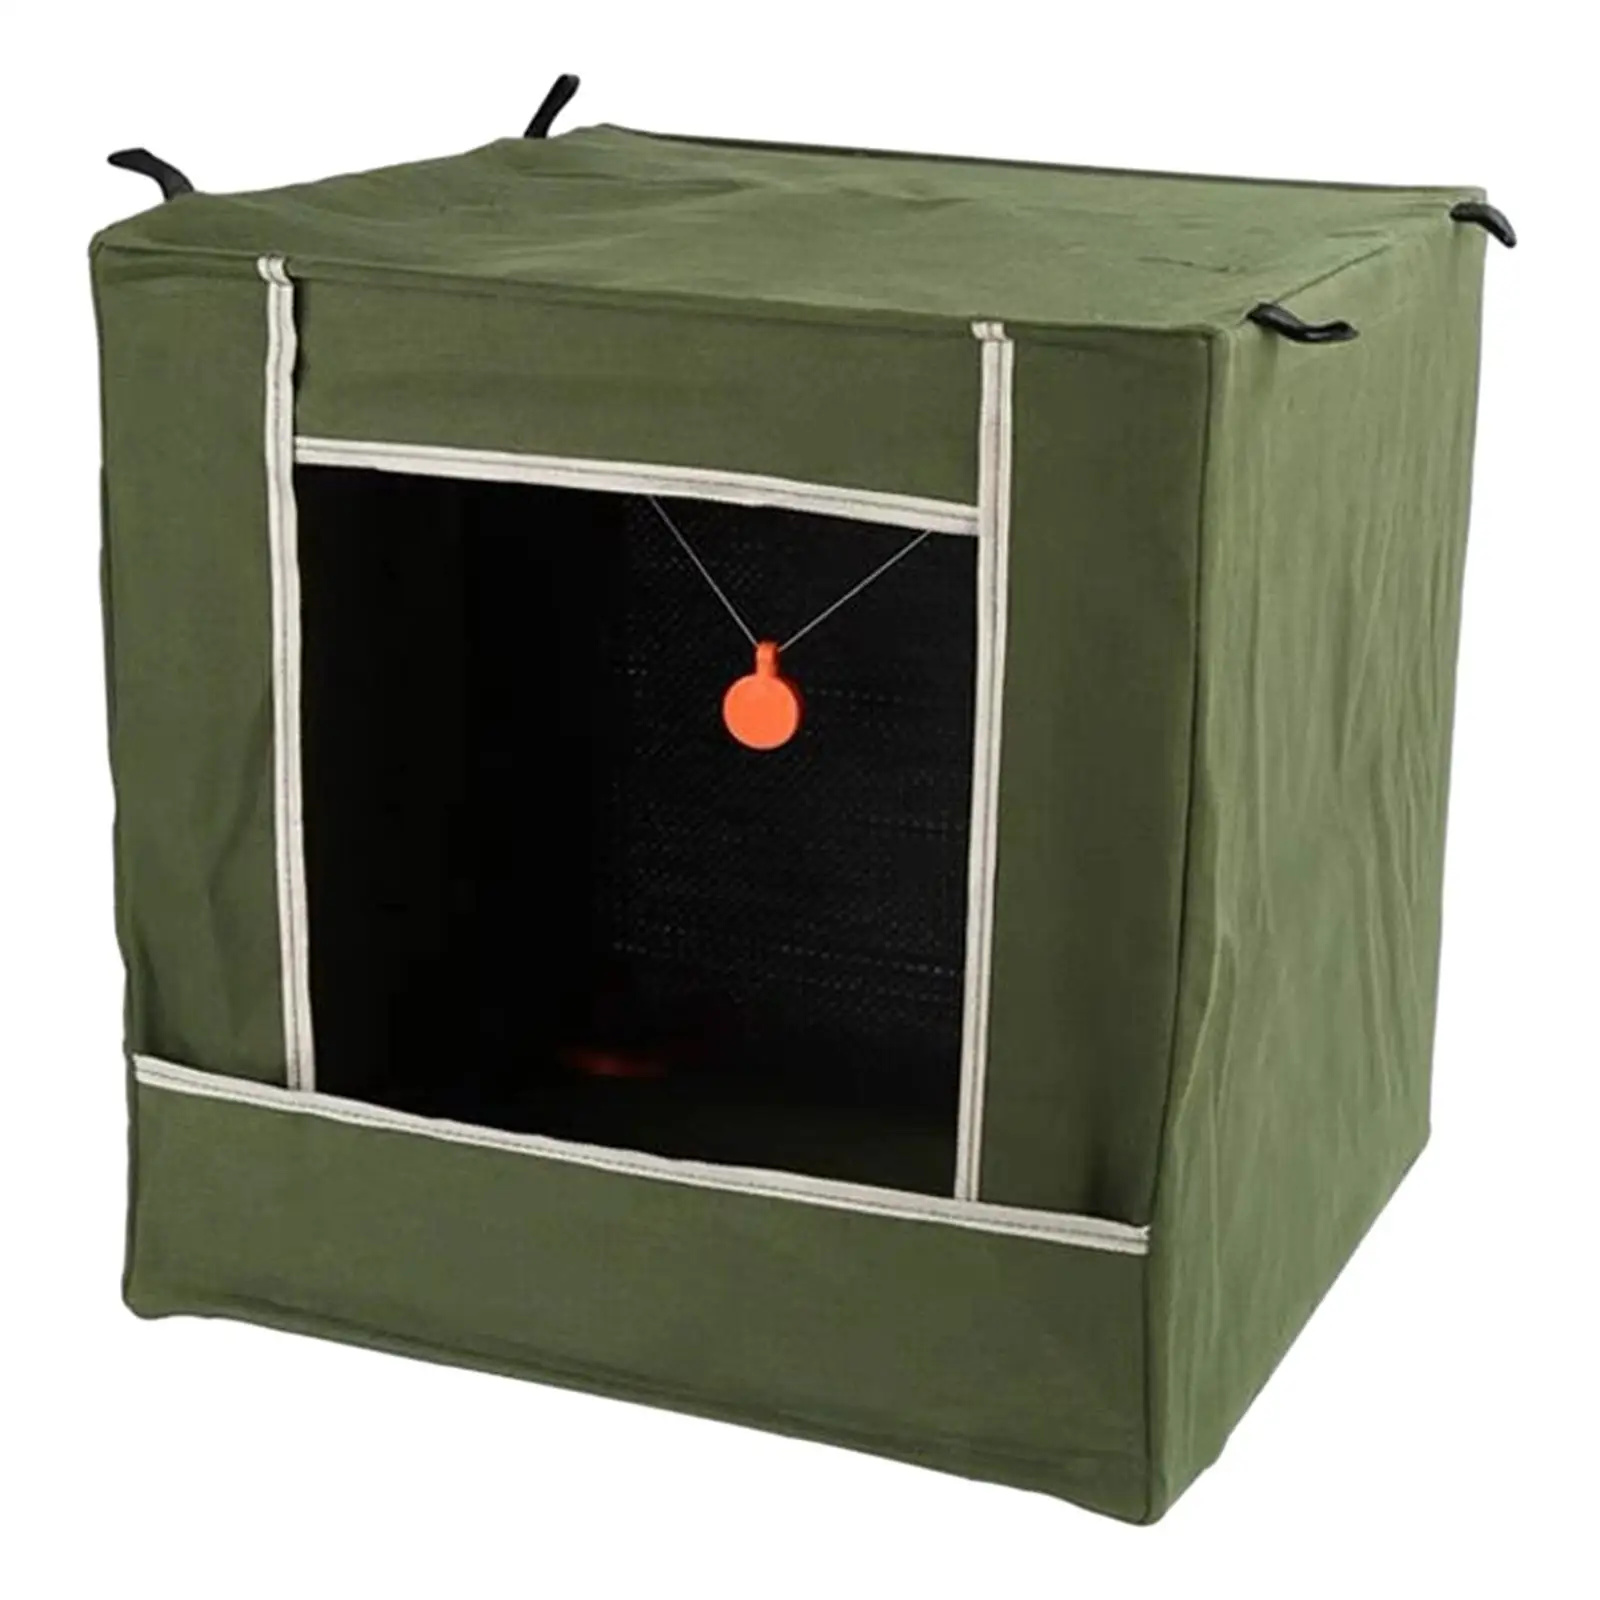 

Target Box 20cm Indoor Outdoor Recycle Balls Soundproof Camping Portable Silent Cloth Training Foldable Catapult Target Case